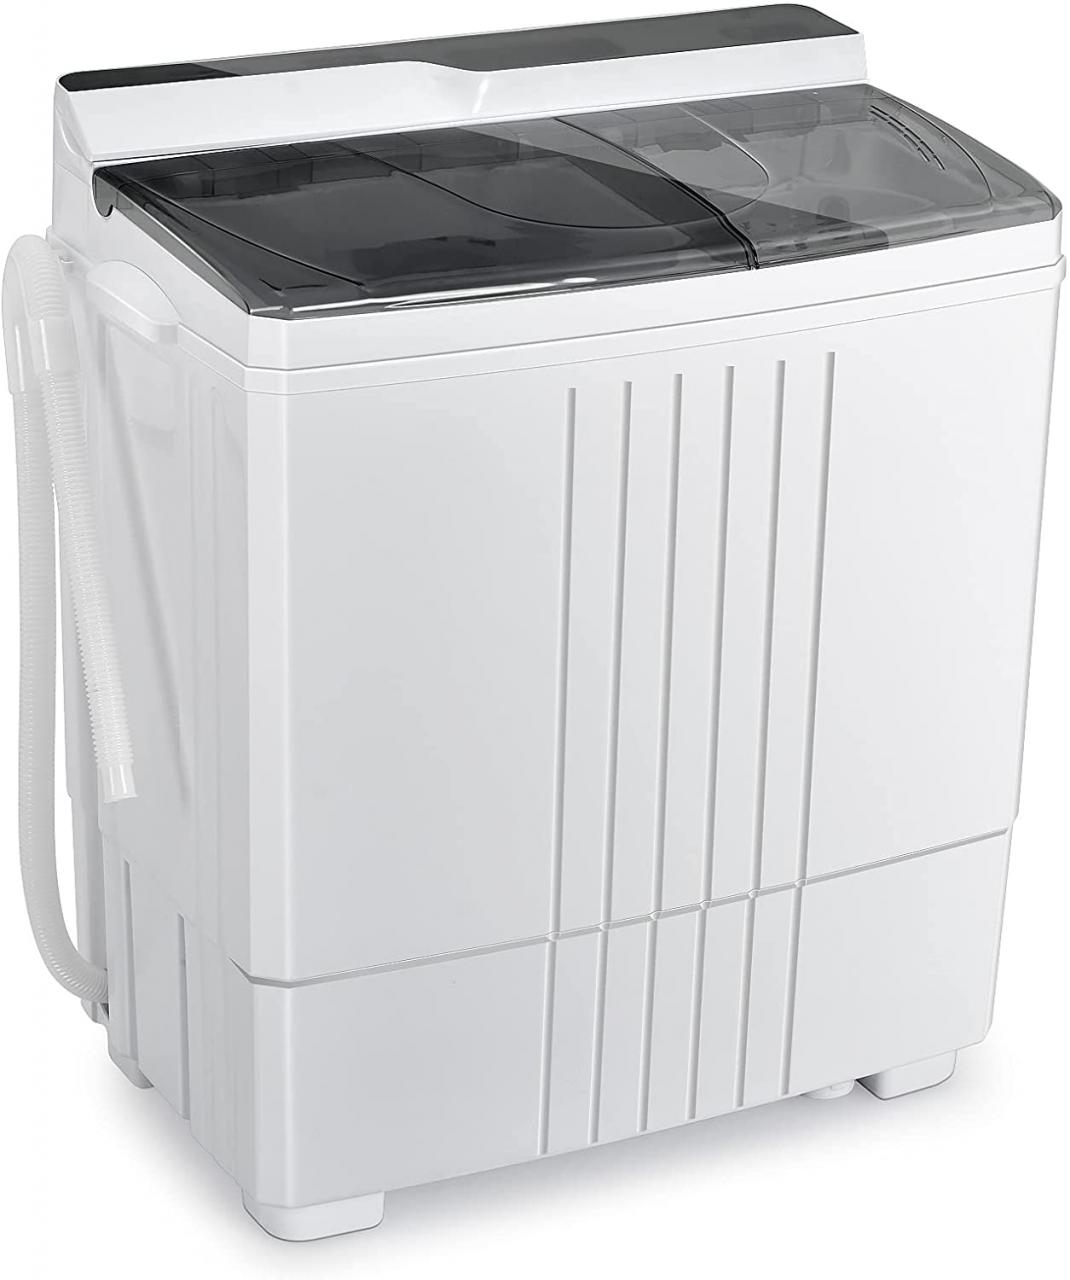 Buy Giantex Portable Washing Machine, Twin Tub Washer and Dryer Combo,  21Lbs (14.4Lbs Washing and 6.6Lbs Spinning), Compact Mini Laundry Washer  for Apartment and Home, Semi-Automatic Built-in Drain Pump Online in Turkey.